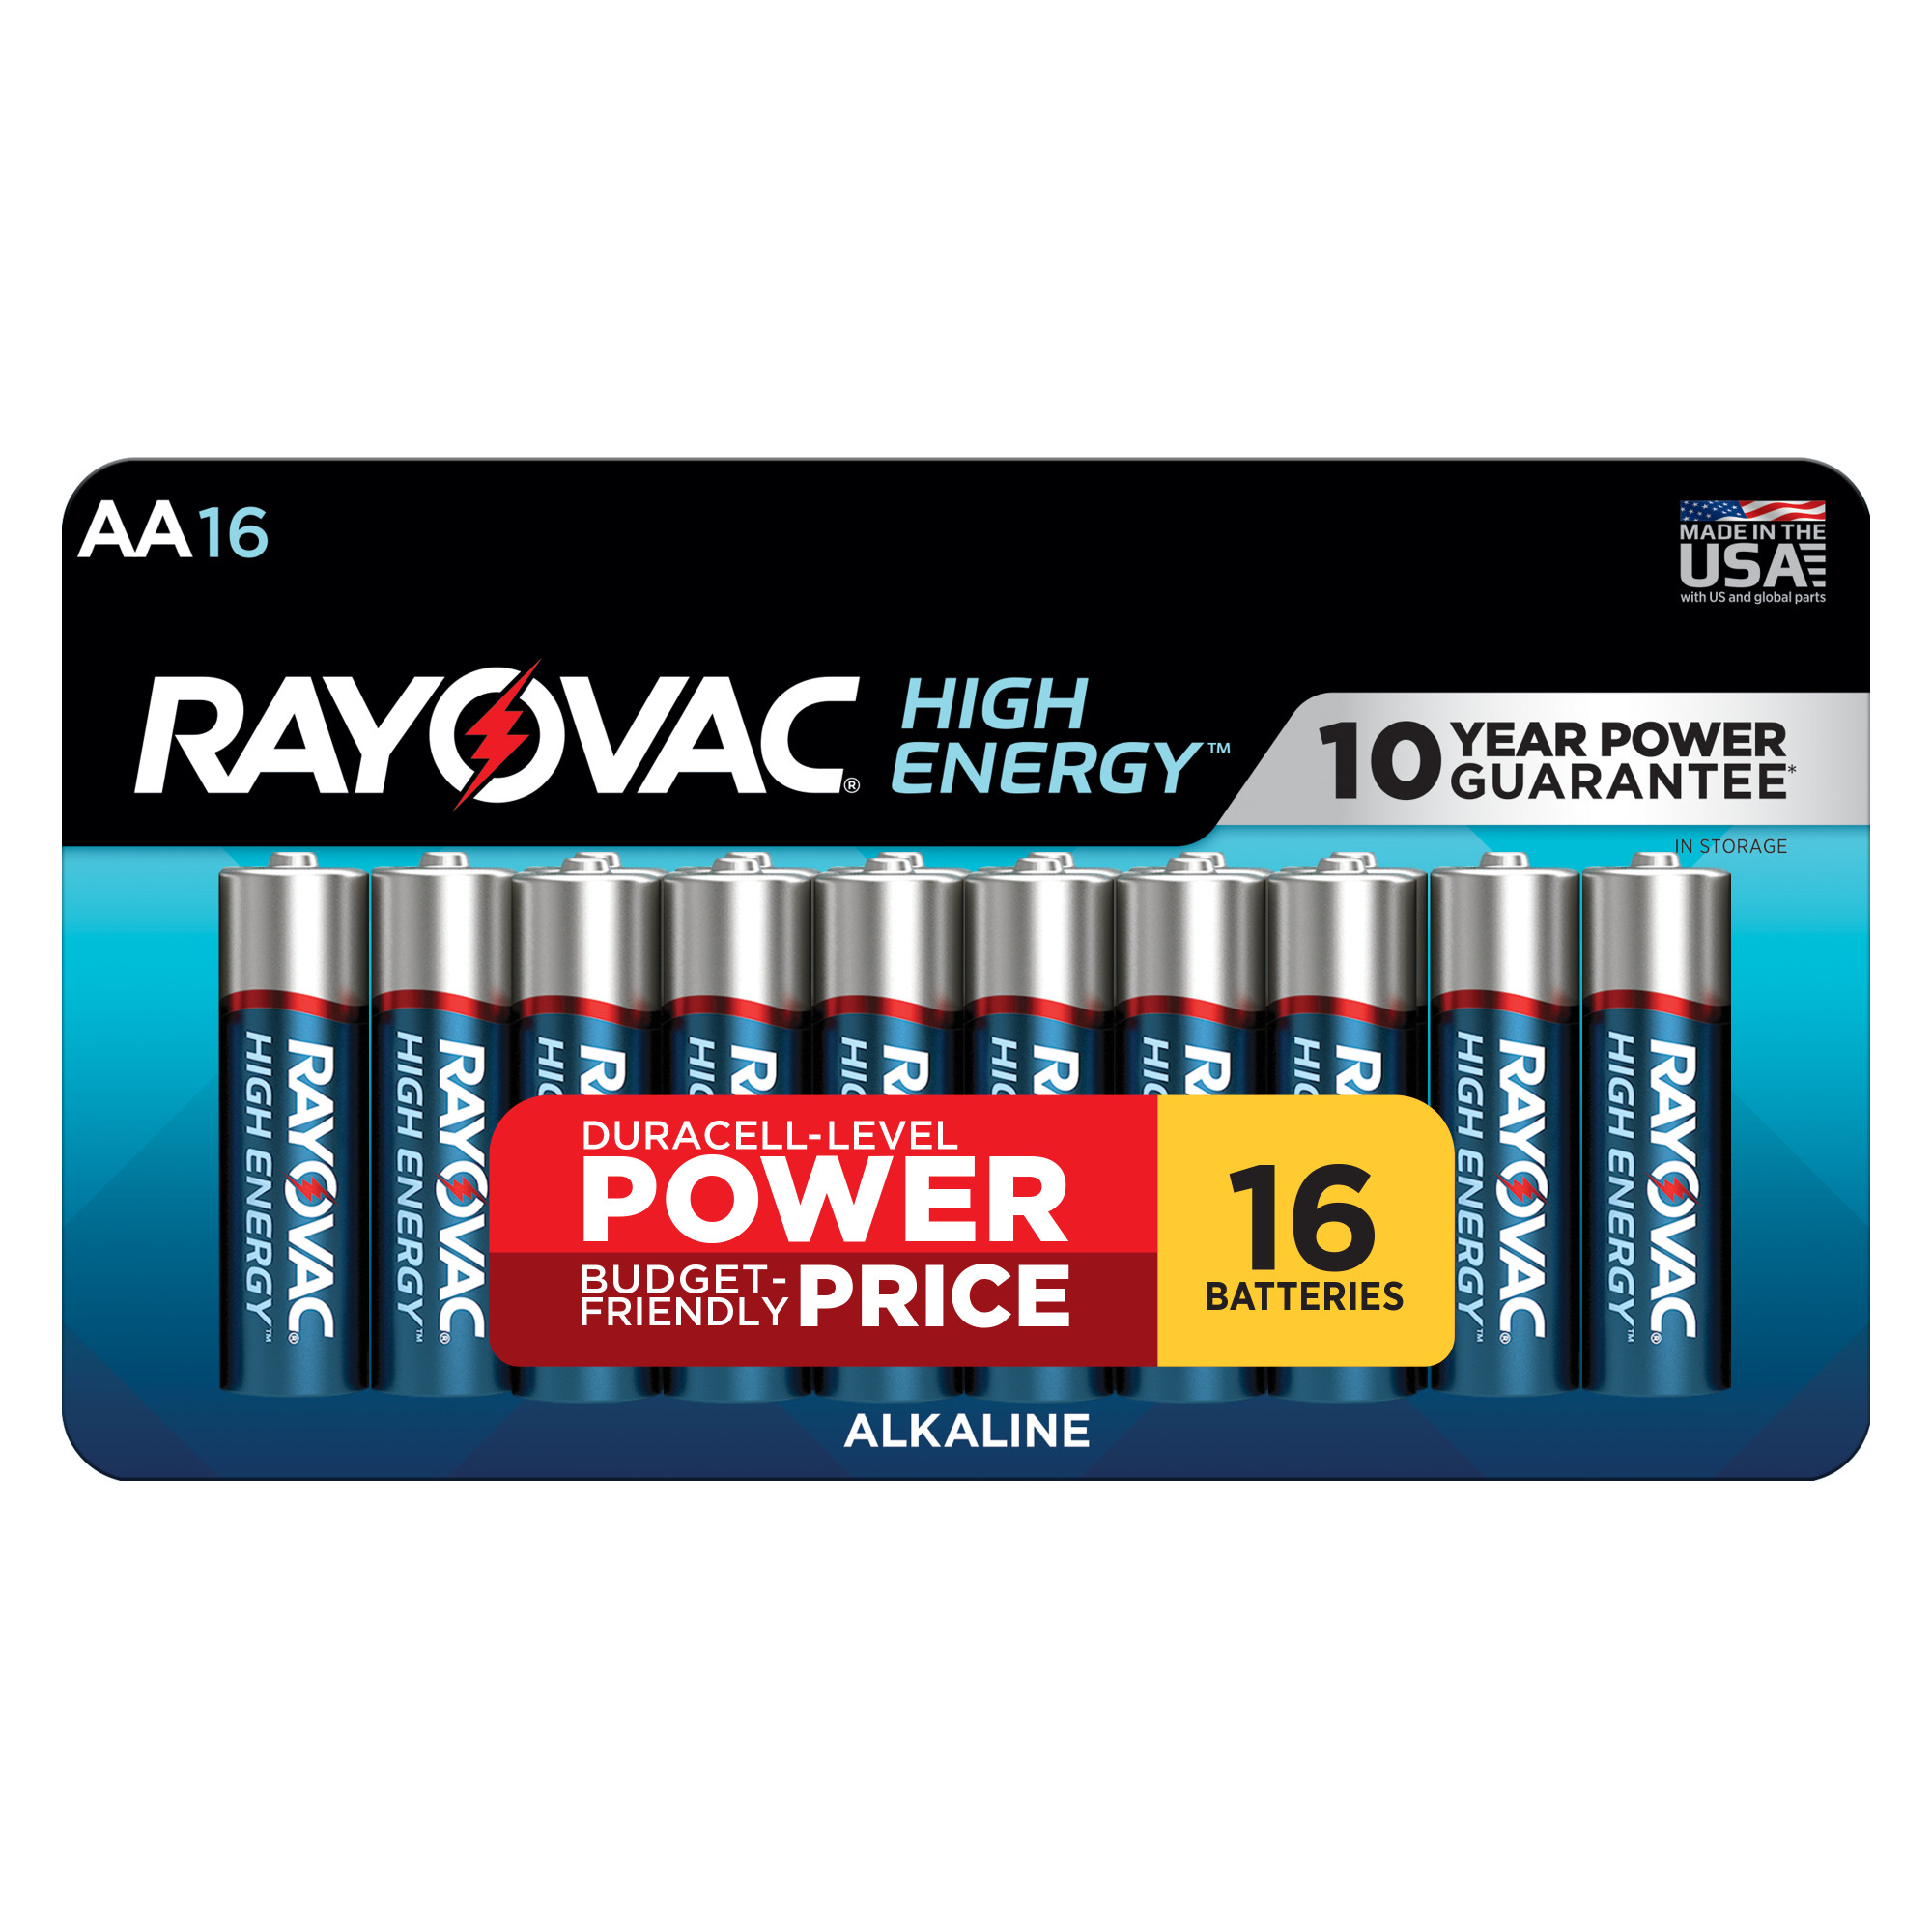 Rayovac High Energy AA Batteries (16 Pack), Double A Batteries - image 1 of 10